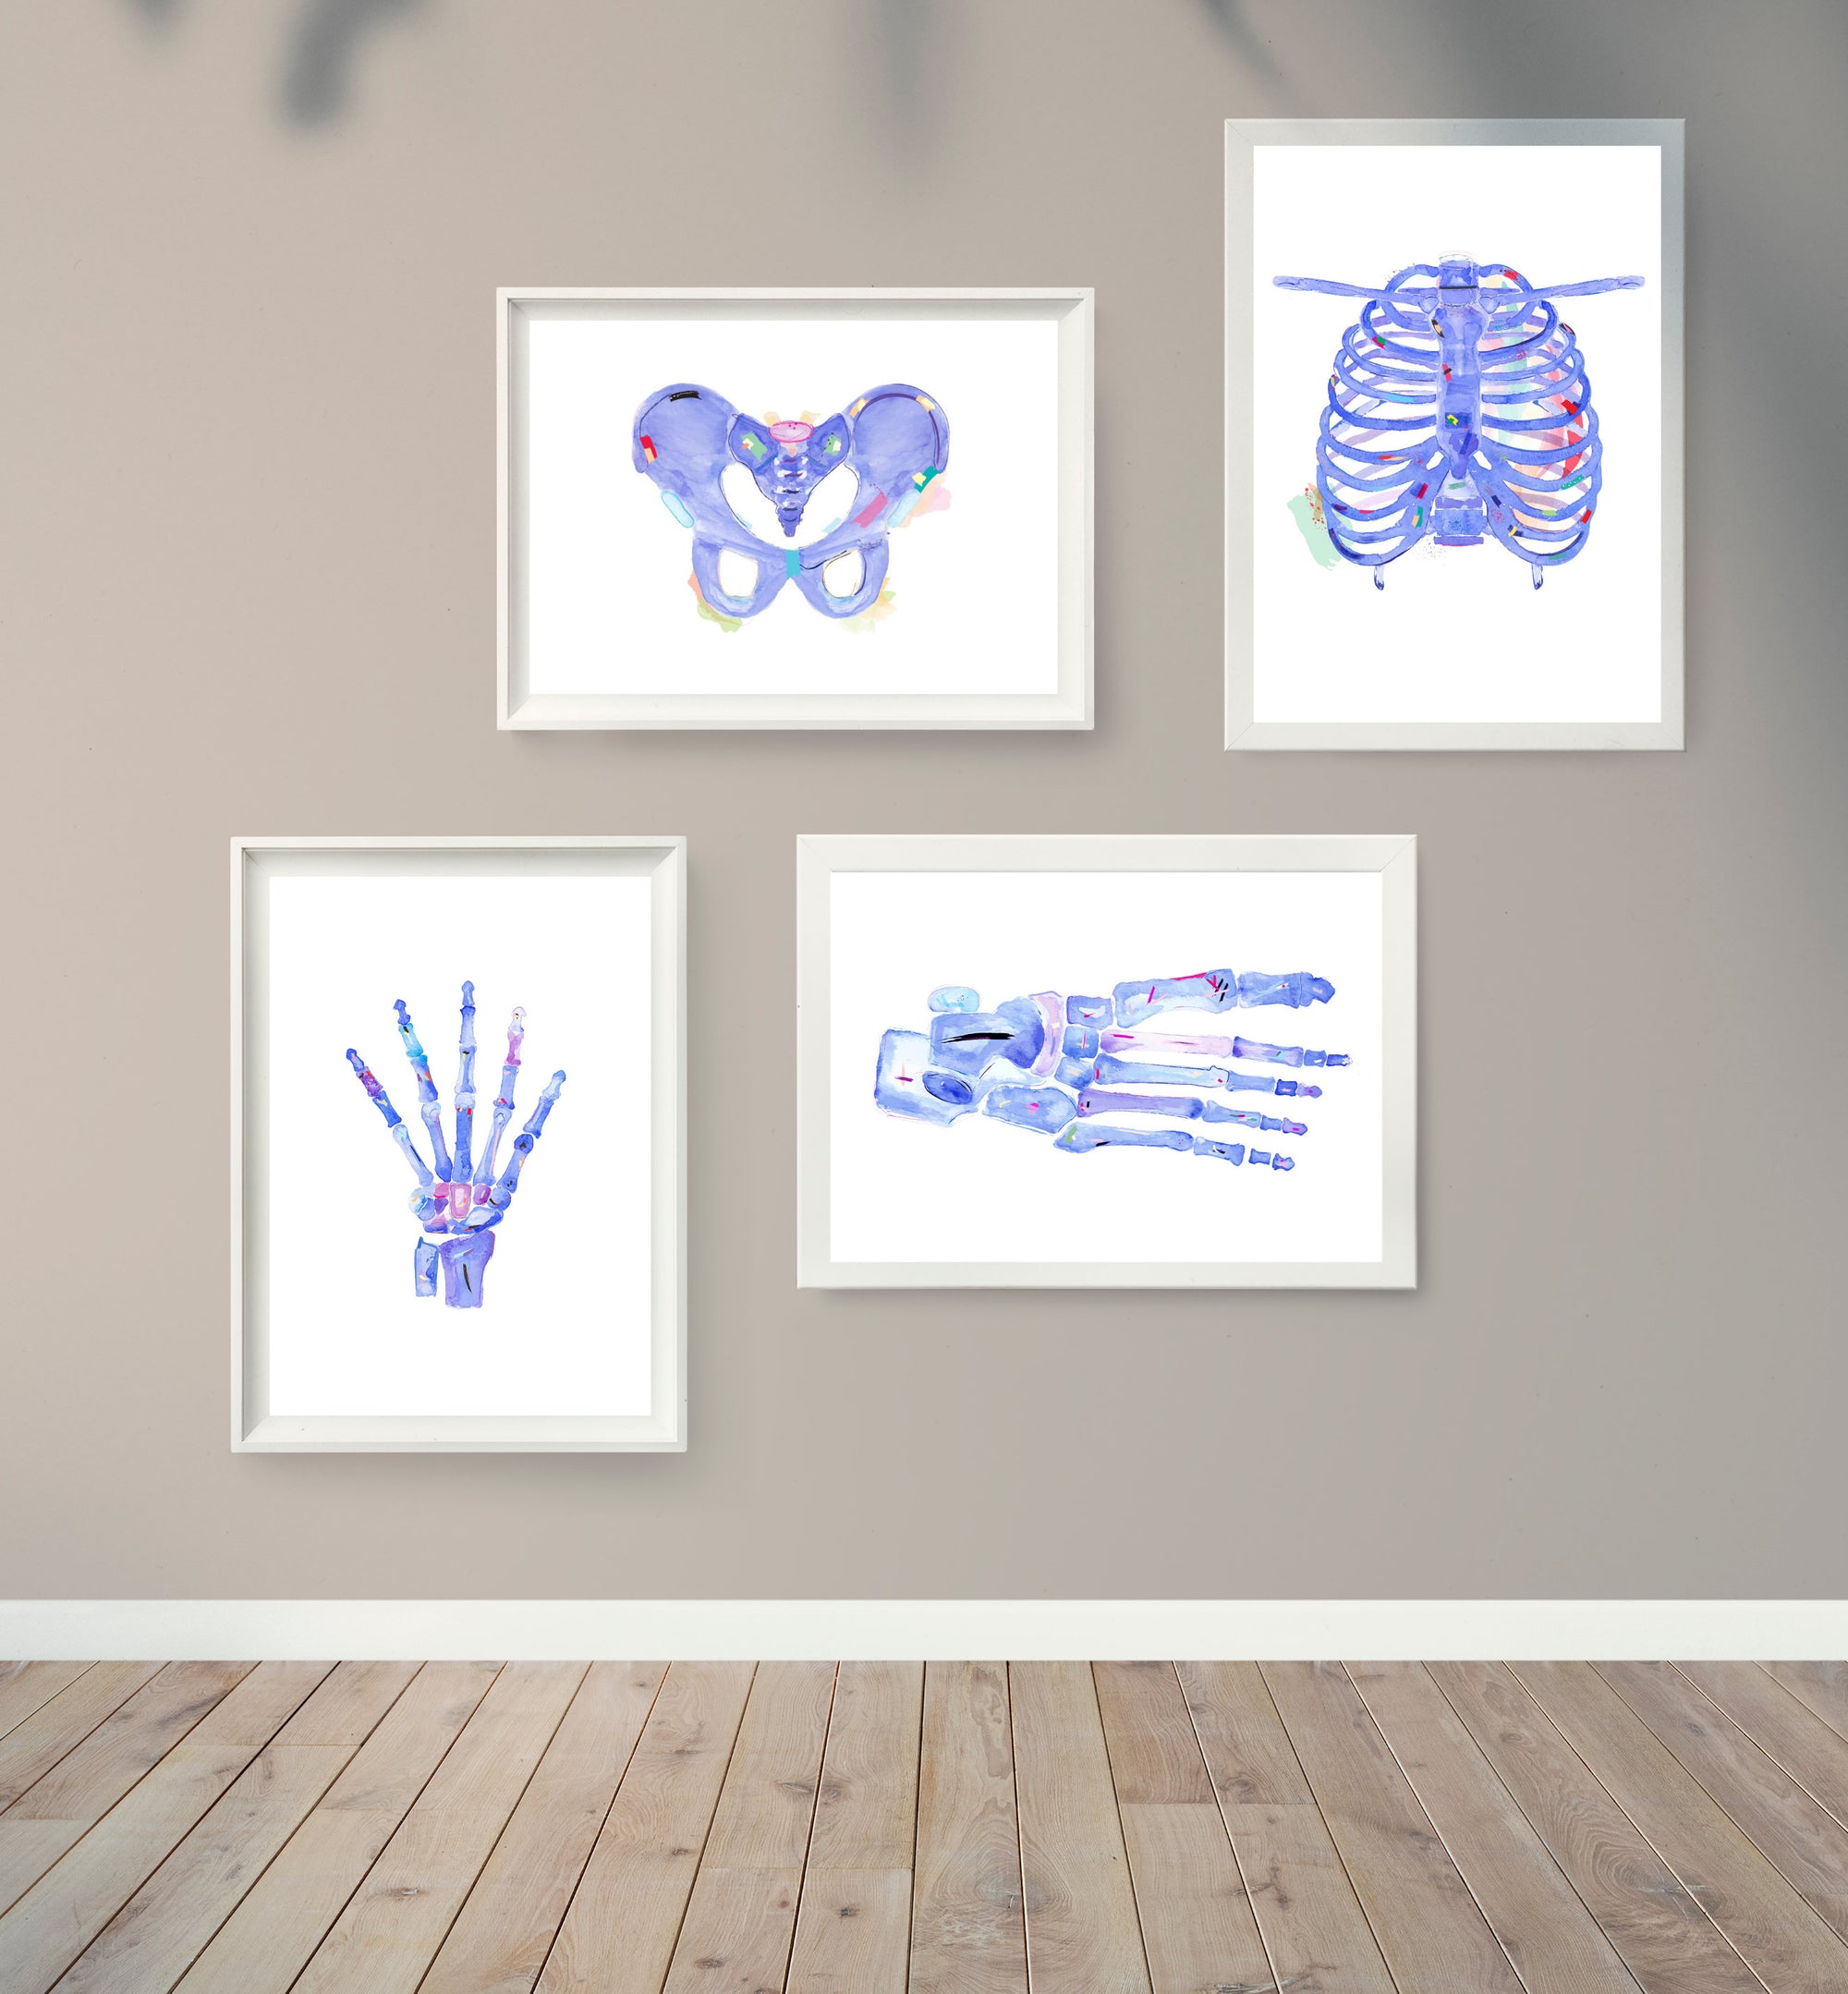 Physical Therapy and Chiropractic Art Print Set of 4, Physical Therapist Gift, Orthopedic Surgeon Gift, Chiropractor Gift, Human Anatomy